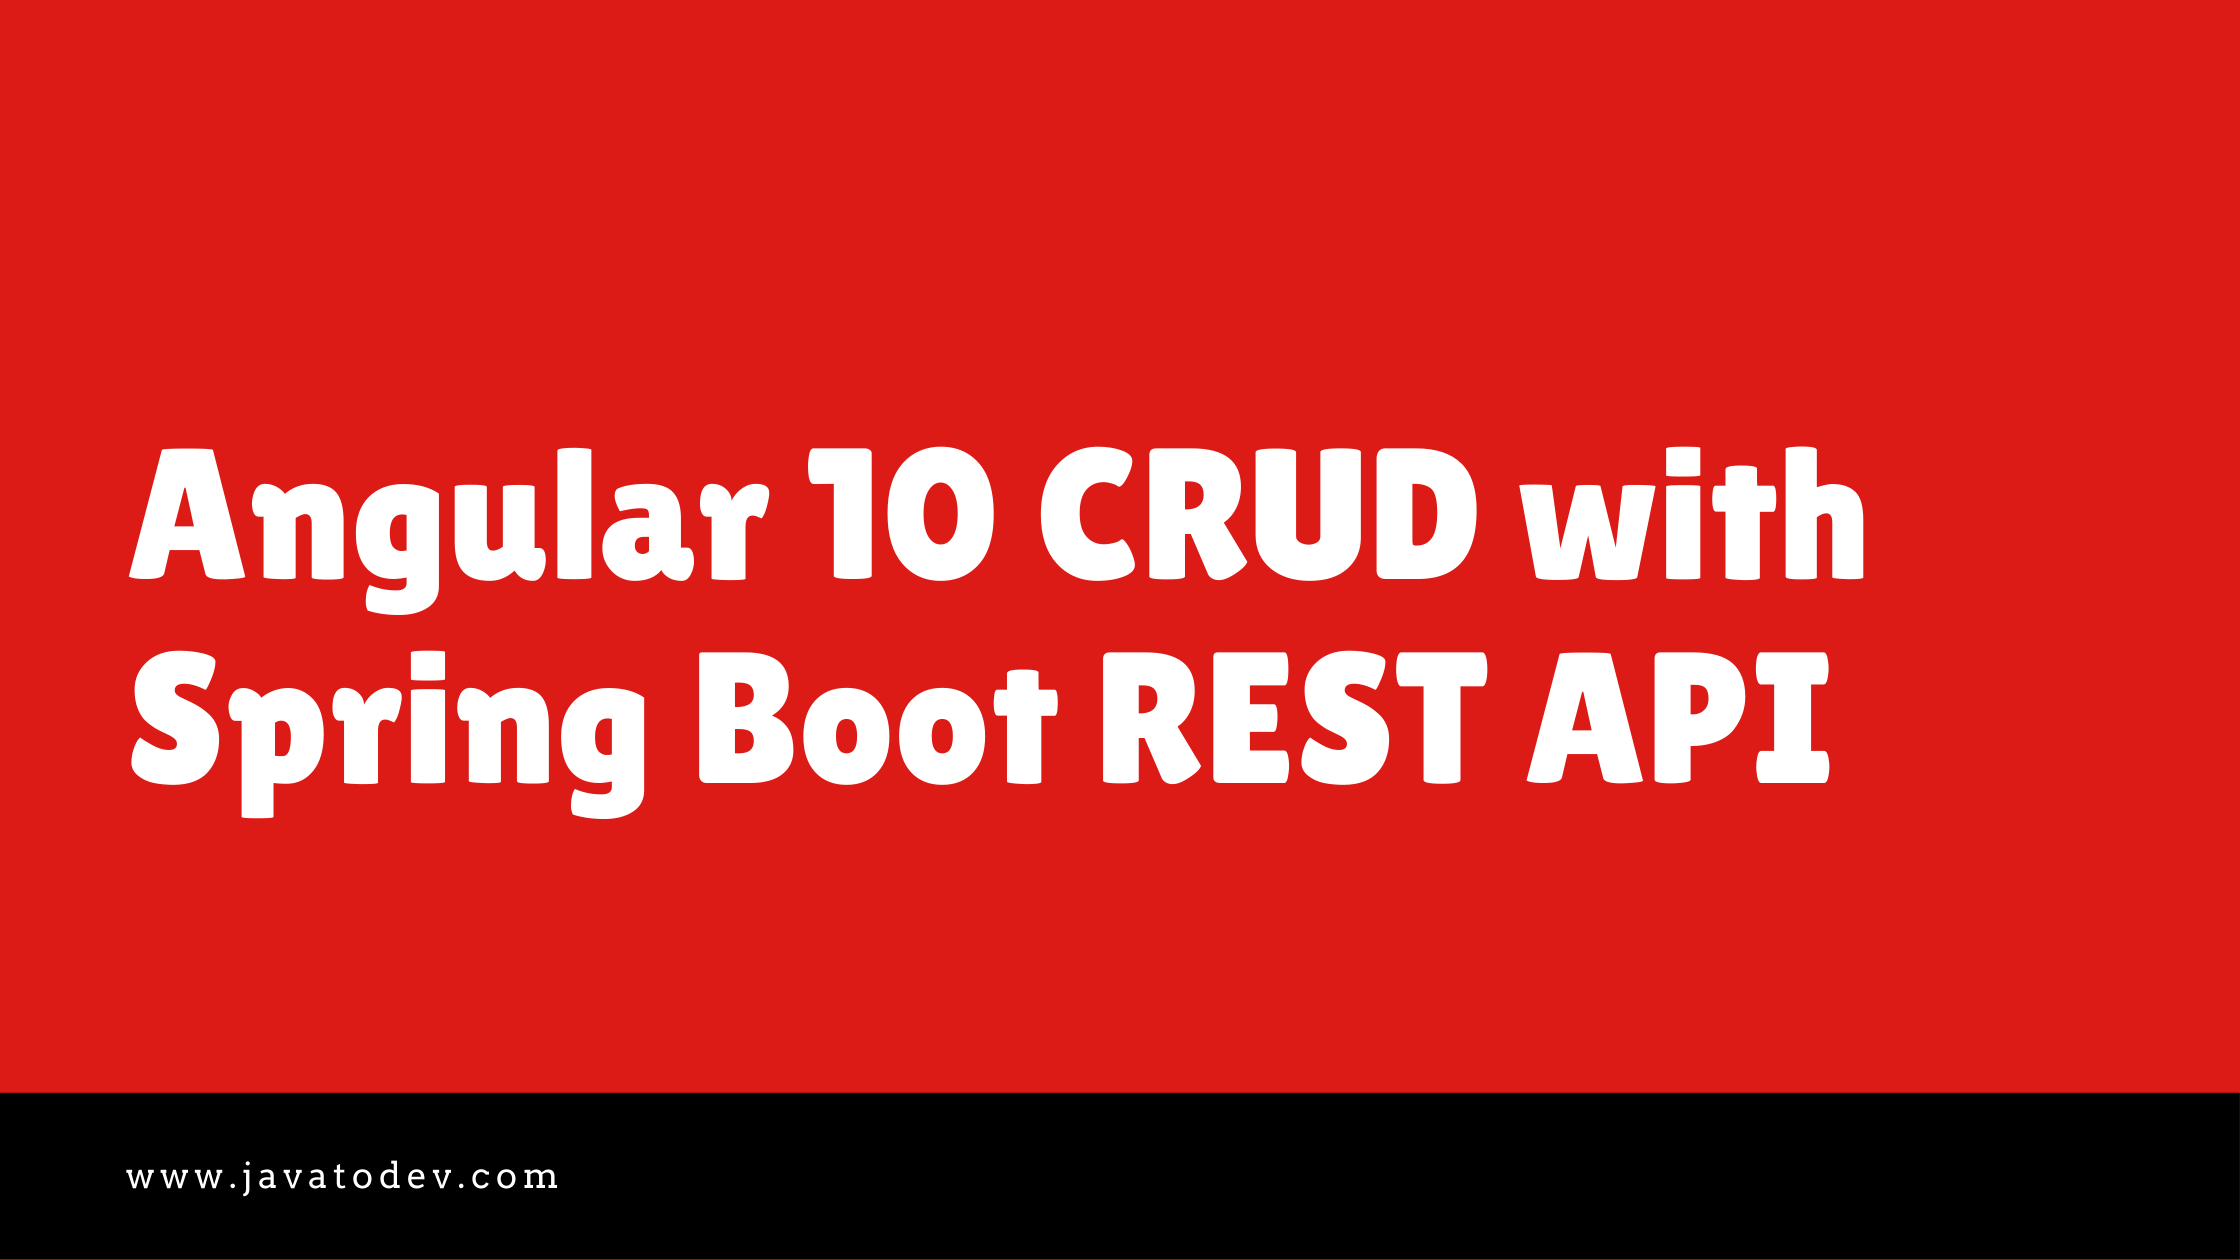 How to develop Angular 10 CRUD with Spring Boot REST API